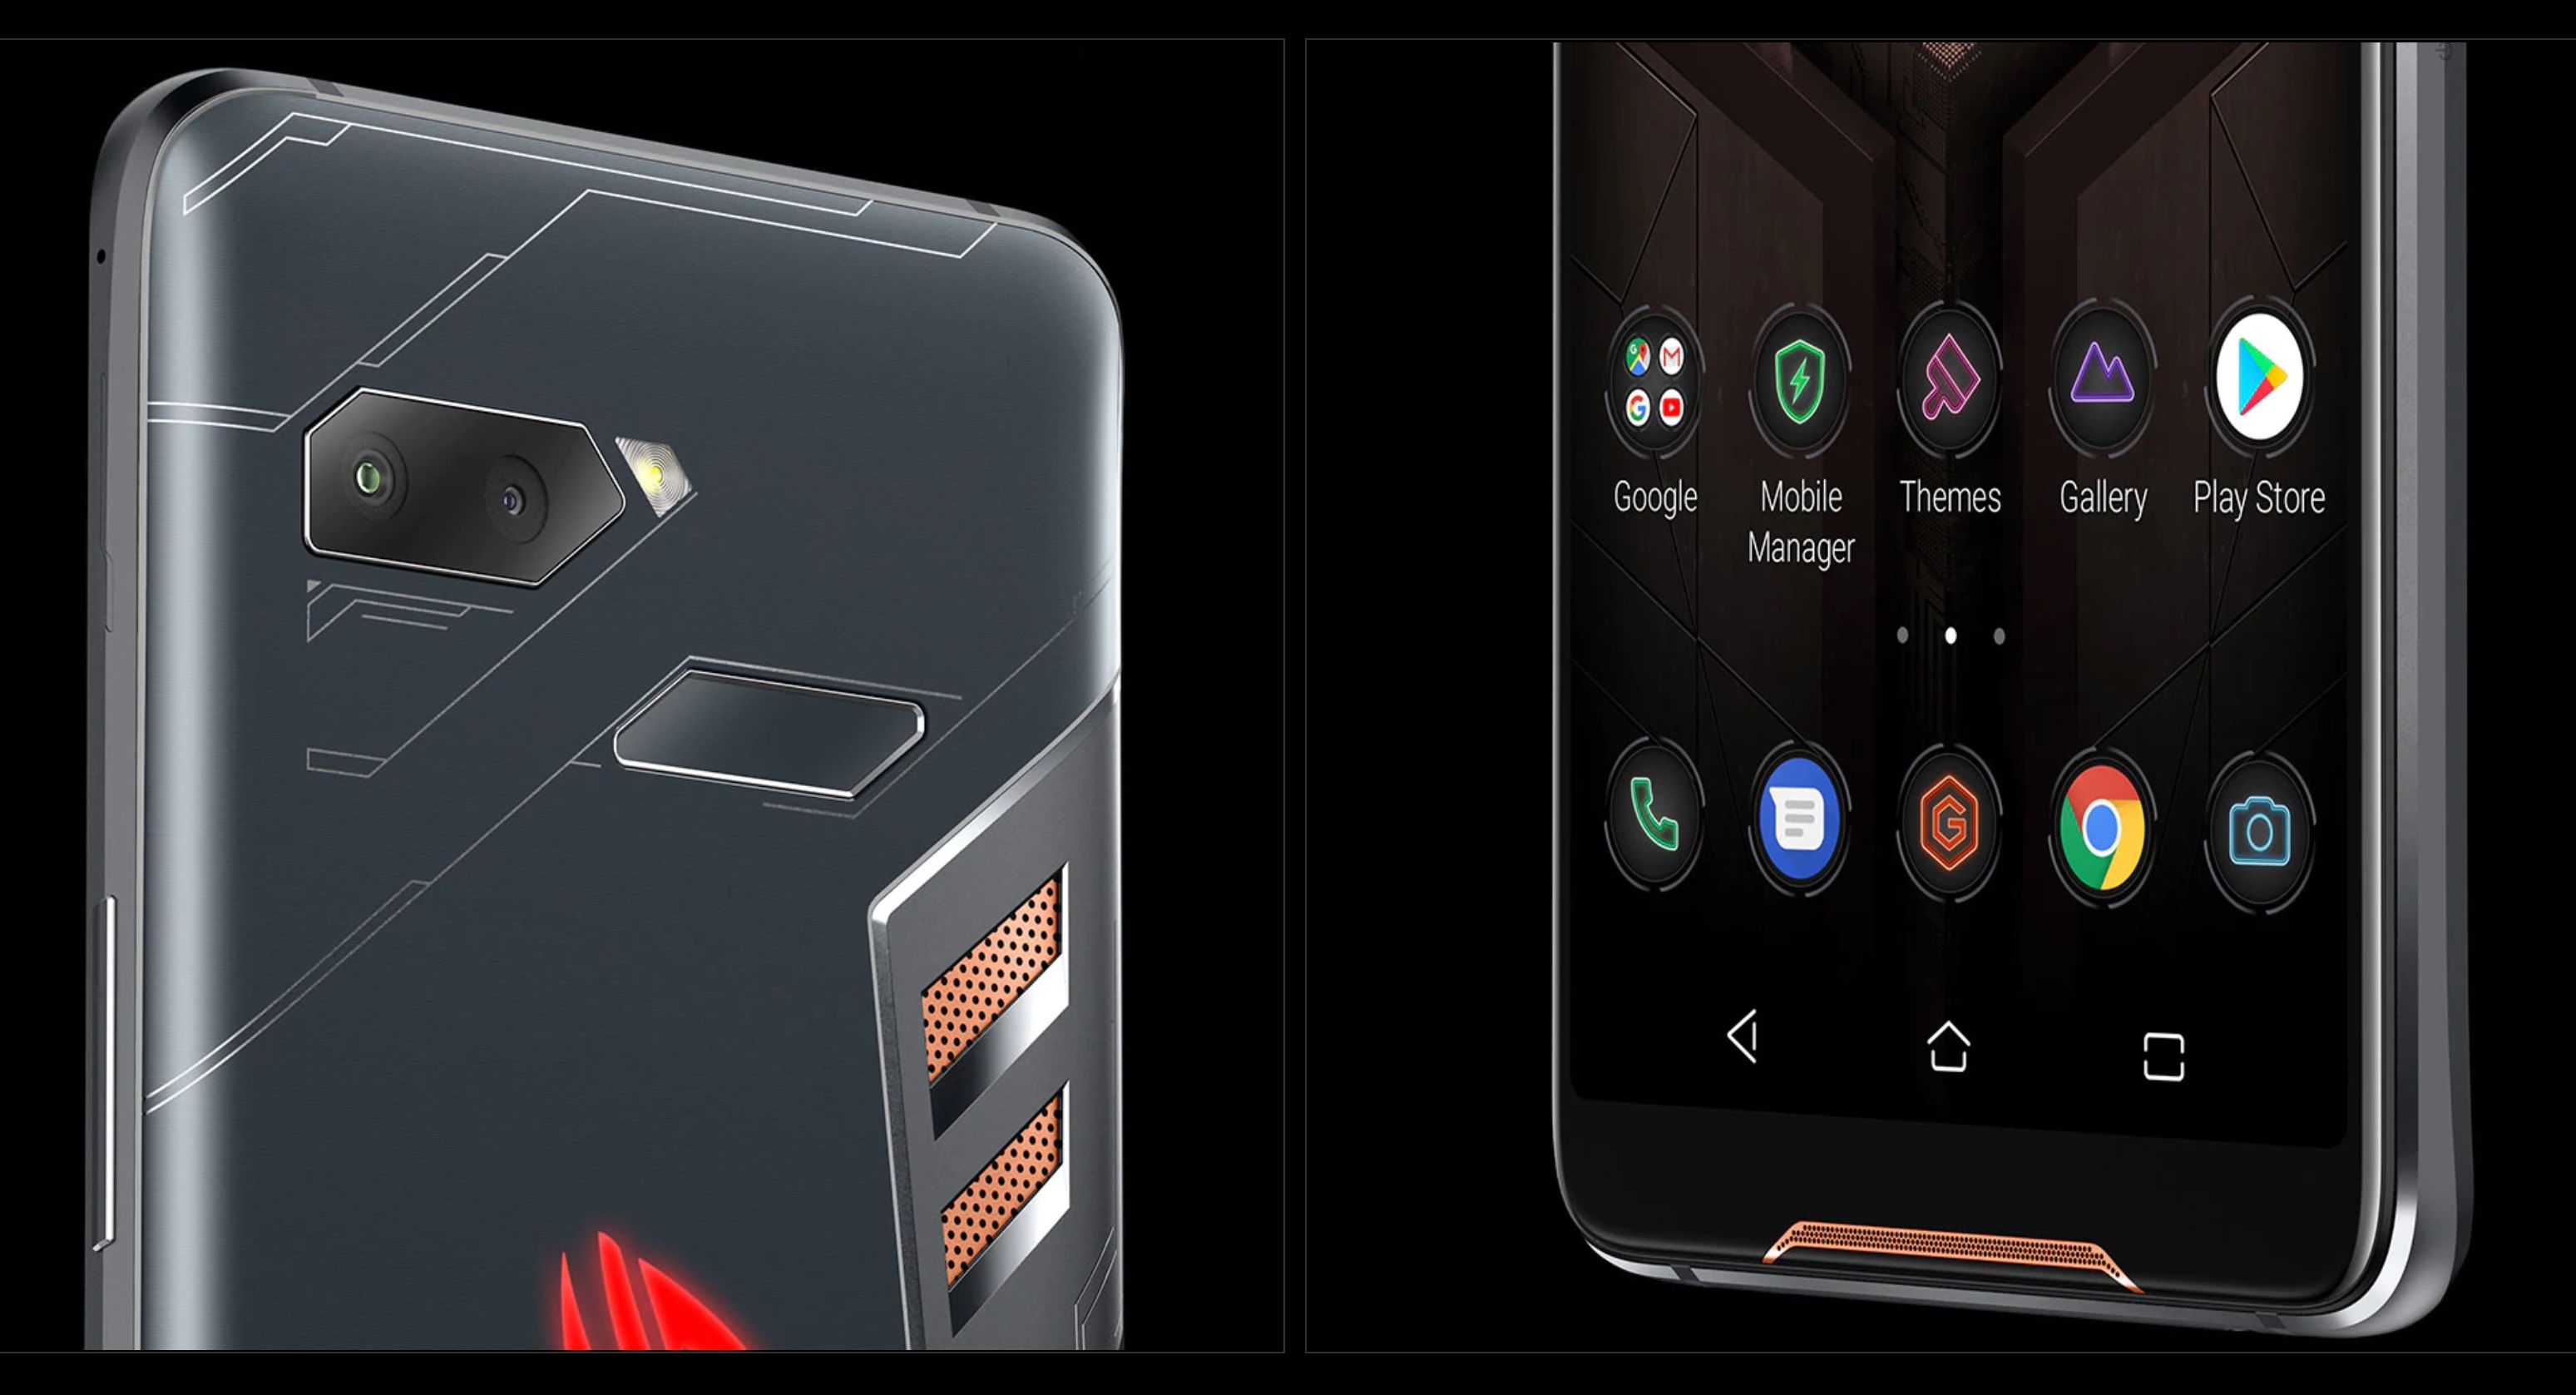 Asus Rog gaming phone front and back against black background.